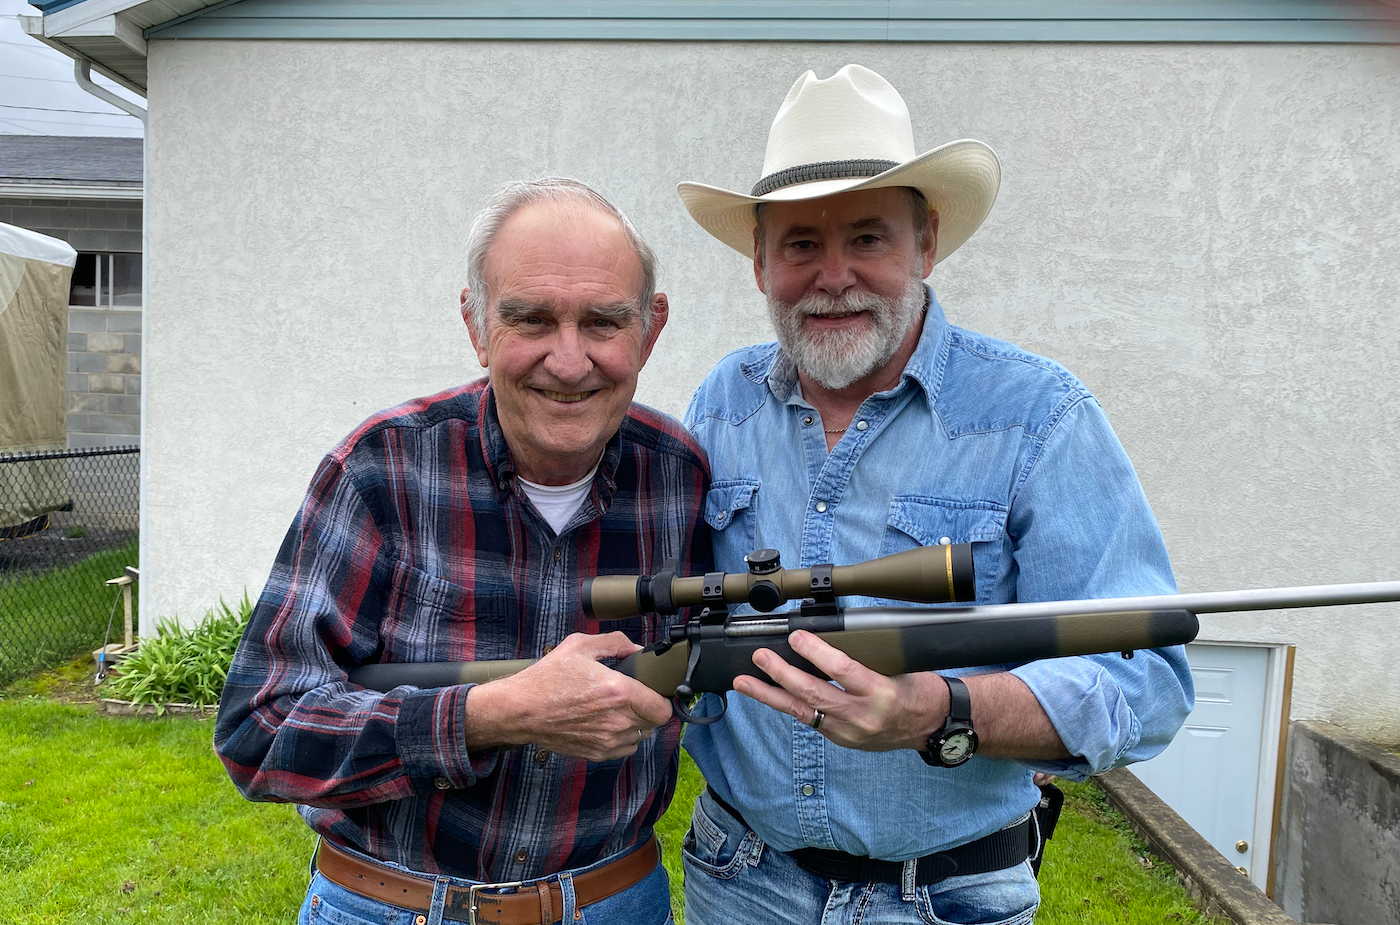 Two men standing in a yard holding a lightning rifle.